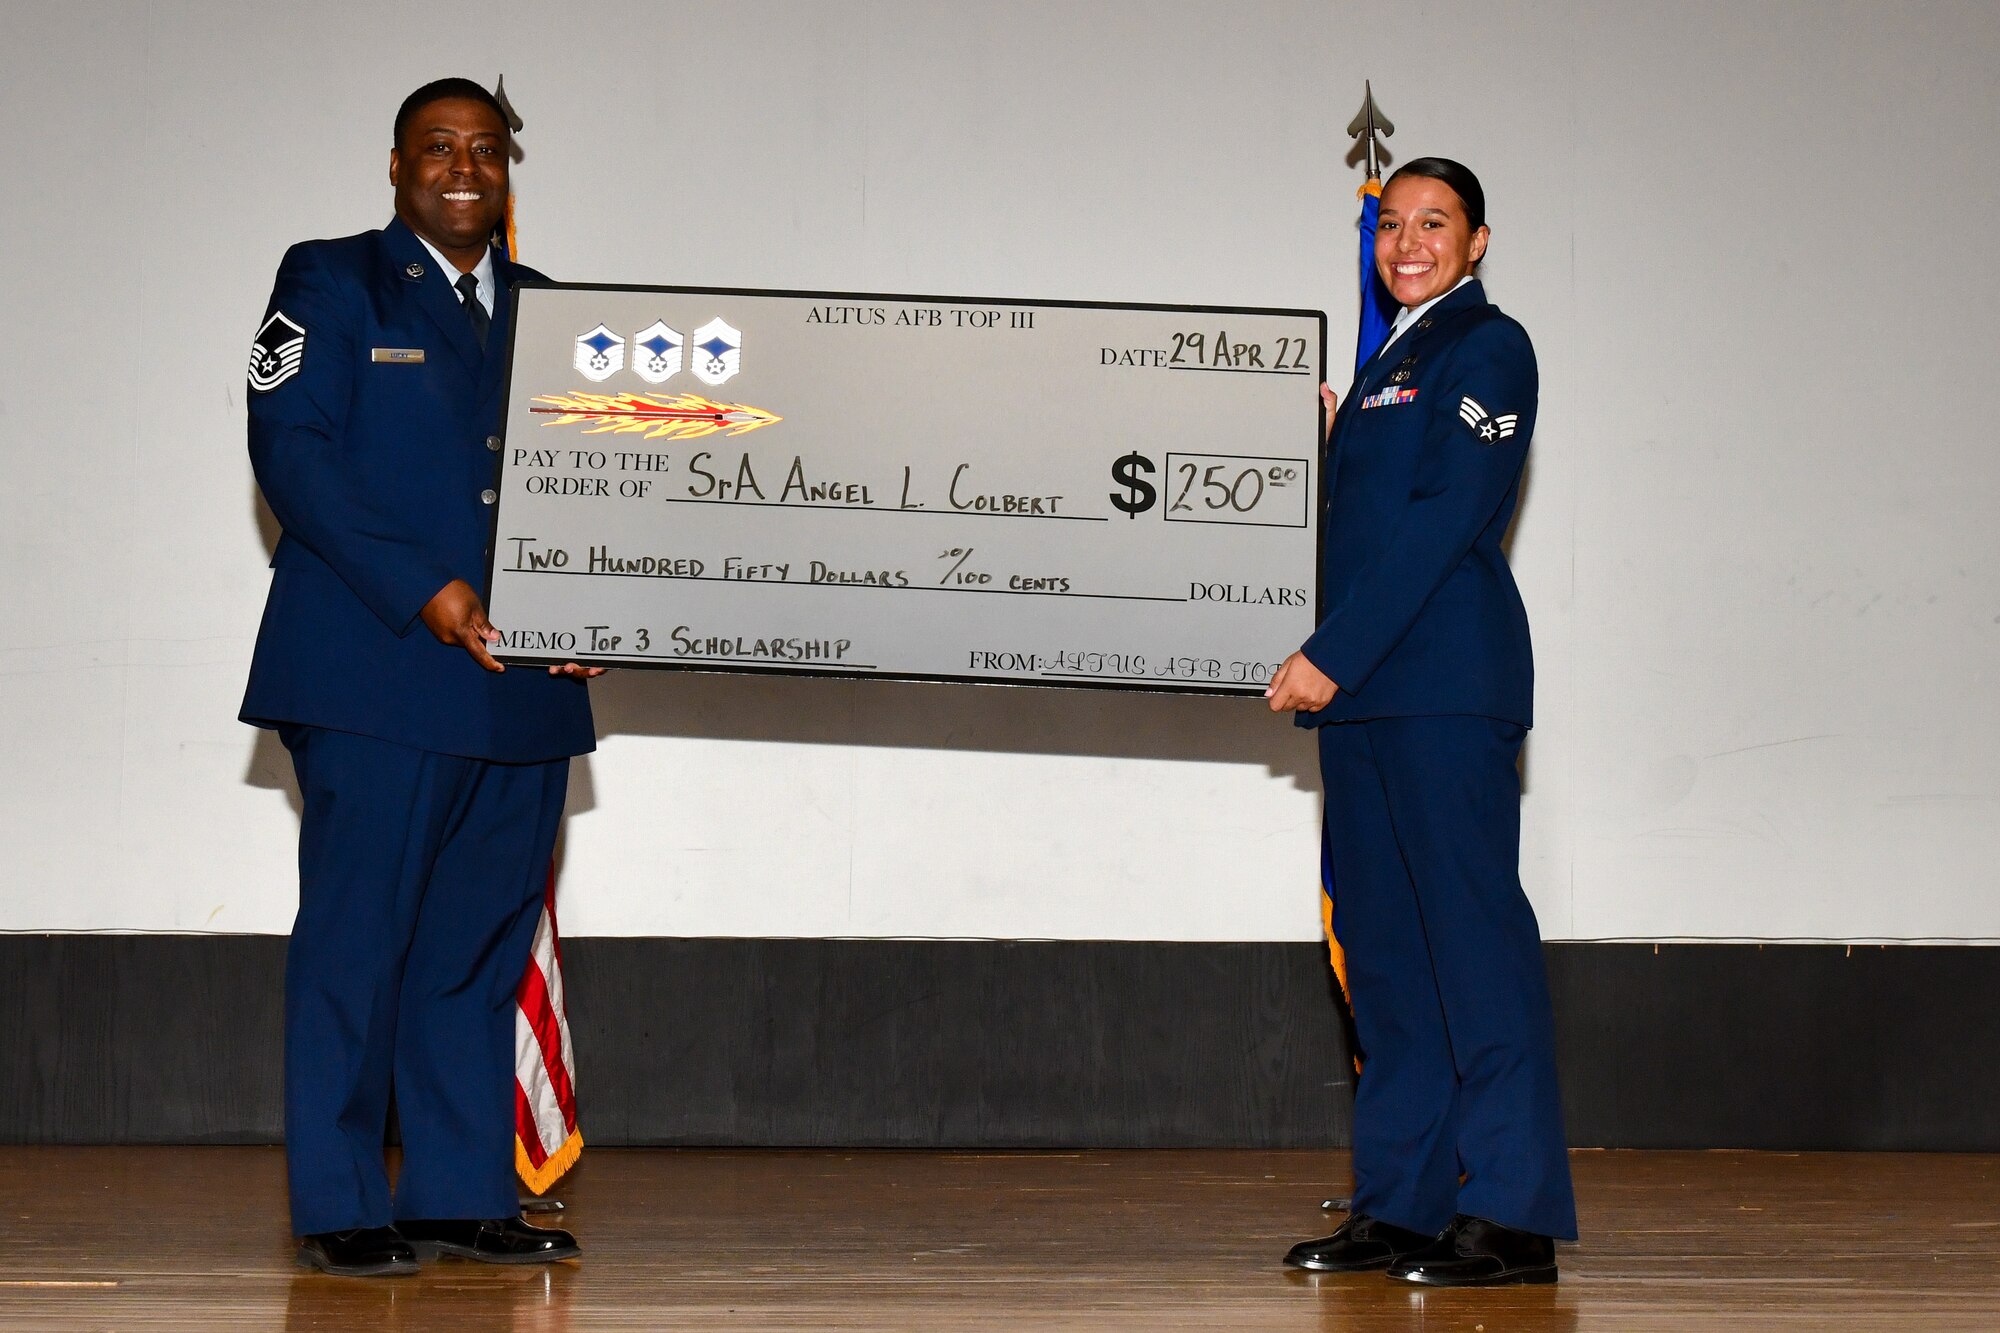 U.S. Air Force Master Sgt. Kelvin Lucky, 97th Security Forces Squadron superintendent of installation security, presents an Altus Top Three scholarship to Senior Airman Angel Colbert,97th Mission Support Group plans and operations lead, during a Community College of the Air Force graduation at Altus Air Force Base, Oklahoma, April 20, 2022. The Top Three  scholarship is given to outstanding performers seeking a higher education. (U.S. Air Force photo by Airman 1st Class Miyah Gray)